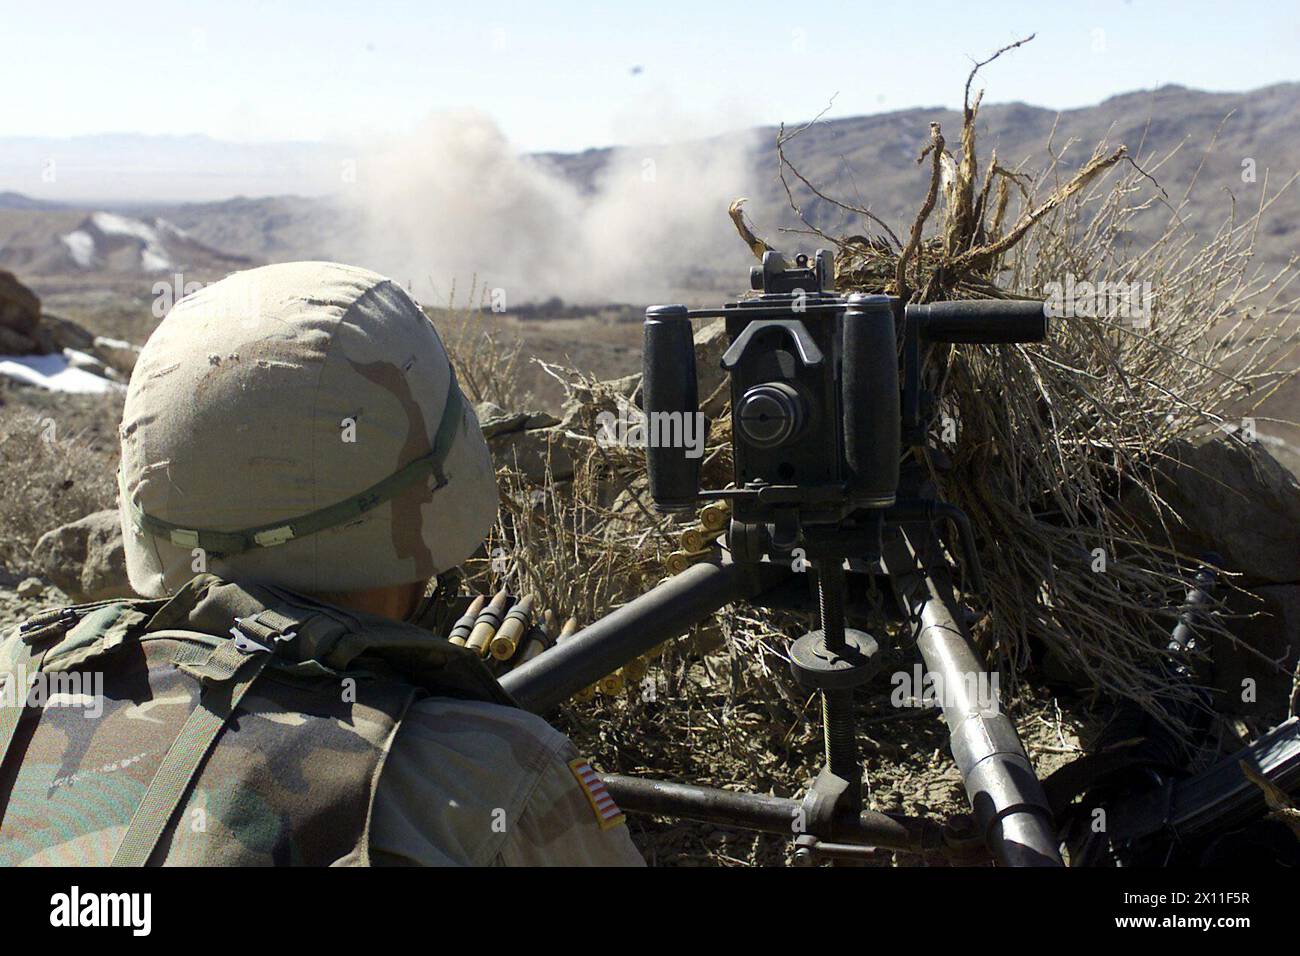 Original Caption: A U.S. Army Soldier with the 1st Battalion, 187th Infantry Regiment, 101st Airborne Division (Air Assault), mans a .50-caliber machine gun during a battle in Operation Anaconda, March 4, 2002. The battlefield is in eastern Afghanistan, south of Gardez in the Shah-e-kot mountain range ca. April 03, 2004 Stock Photo